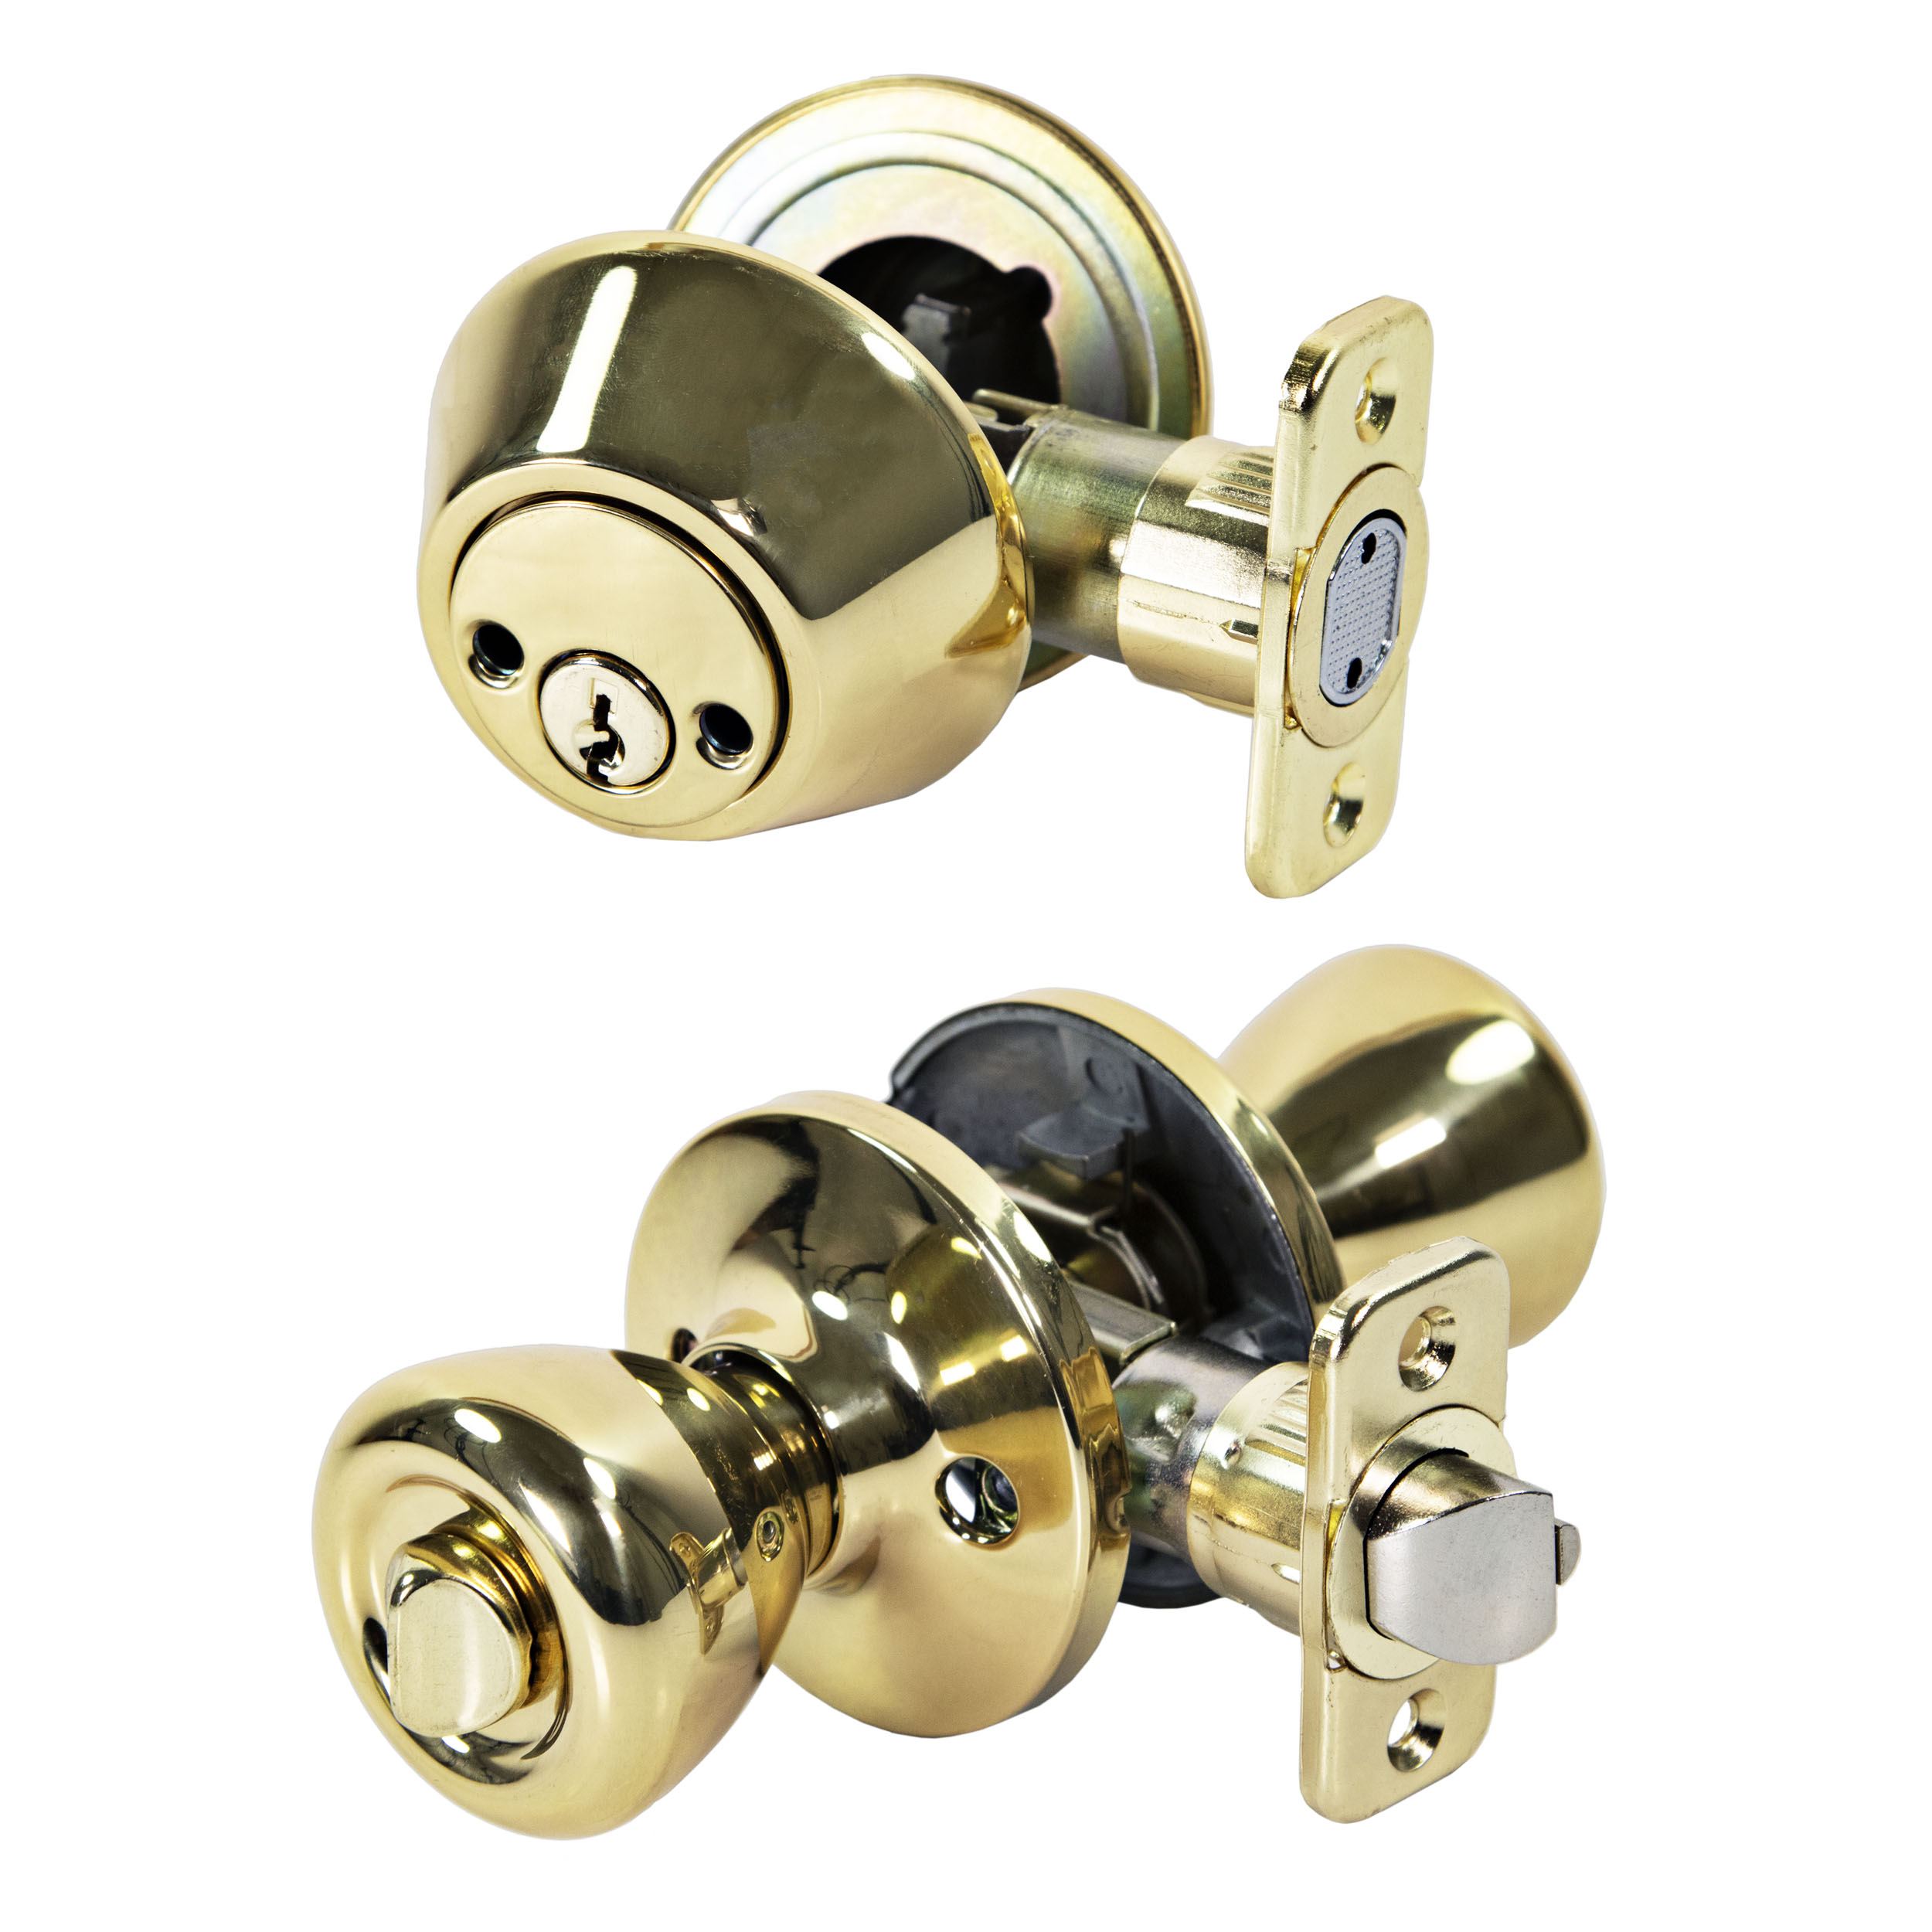 Ultra Security Rittenhouse Keyed Entry with Deadbolt Tulip Door Knob - Security Keyed Entry with Deadbolt Lockset, KW1 Keyed Entry, Fits 1-3/8" To 1-3/4" Thick Door (Polished Brass Finish, 1 Pack) - image 1 of 10